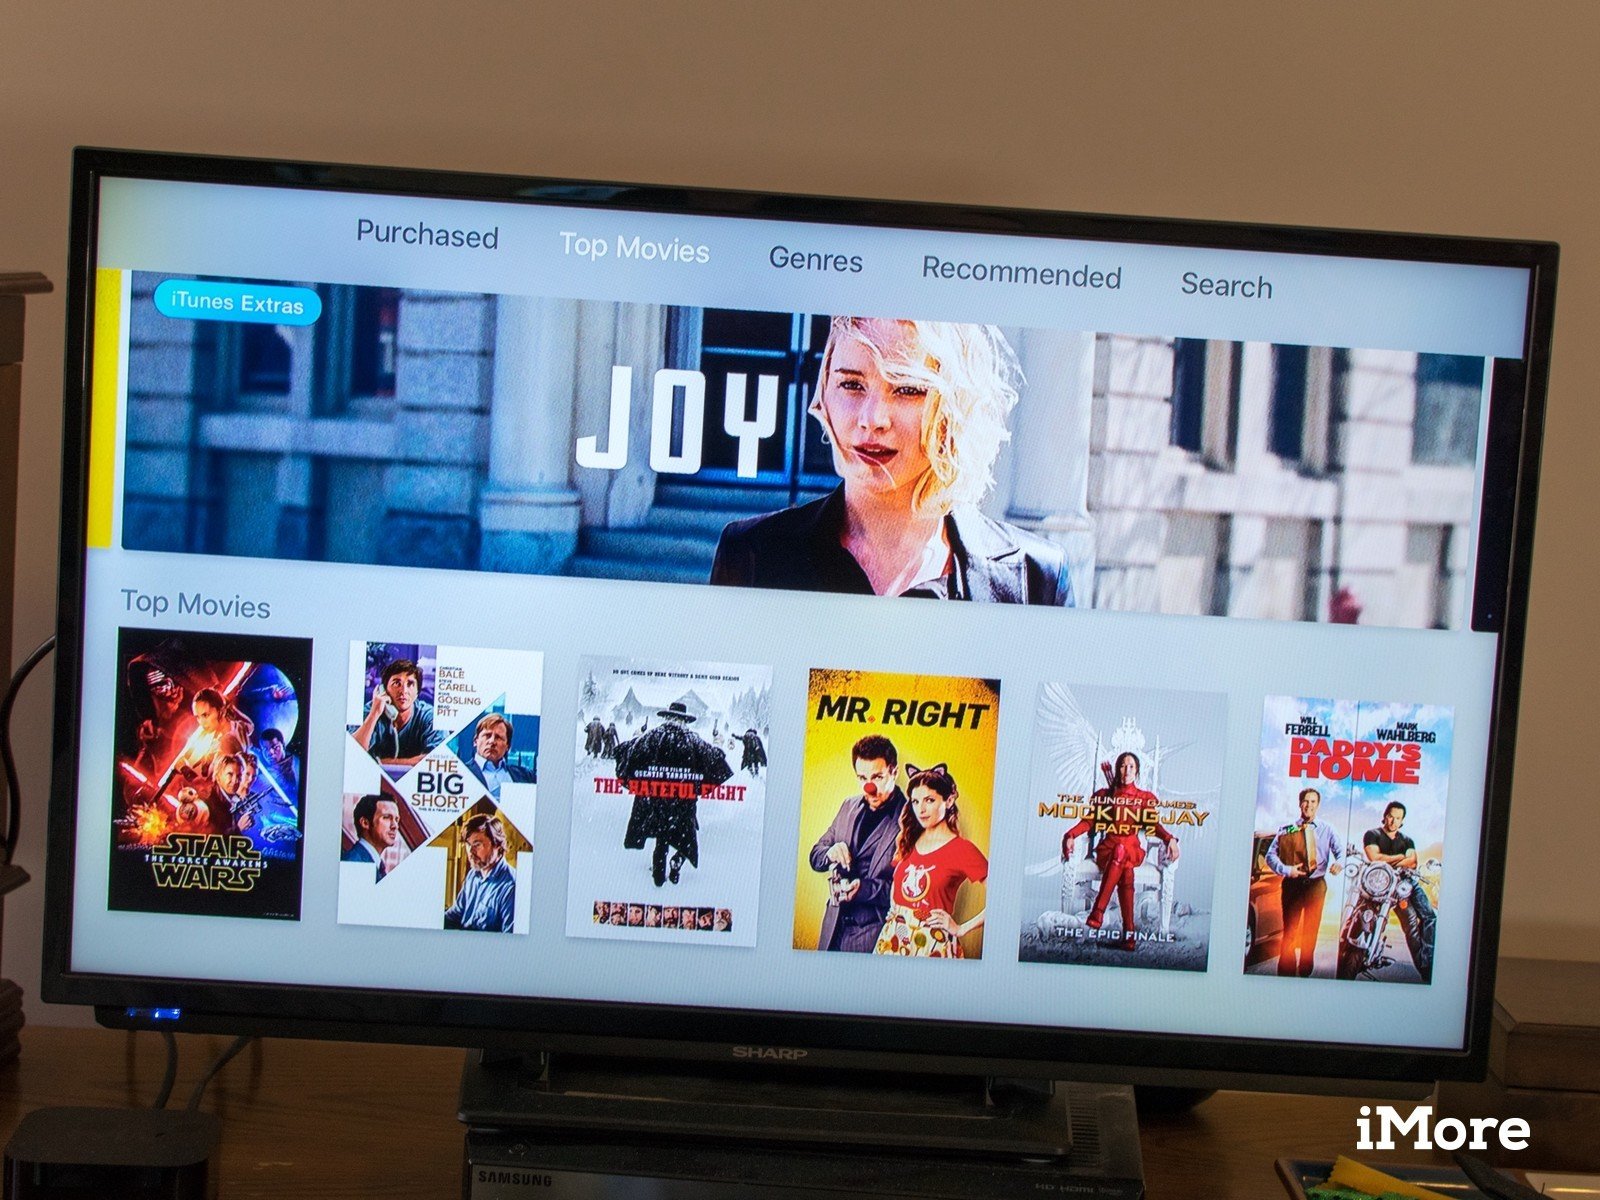 How to rent or buy movies and TV shows on Apple TV